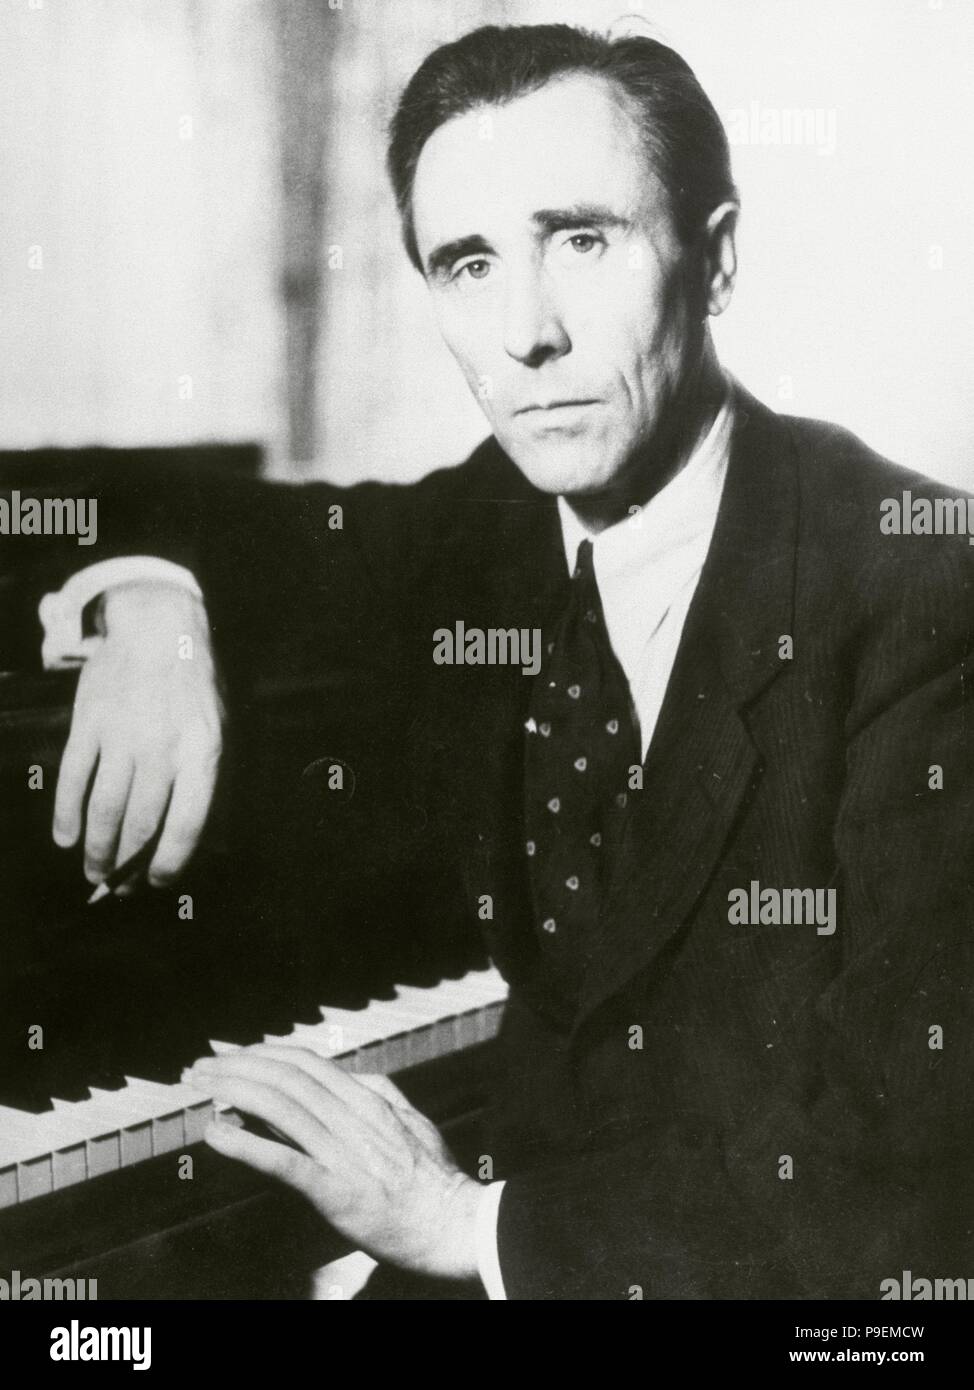 Werner Egk (1901-1983). German composer and conductor. Portrait. Photography. Stock Photo